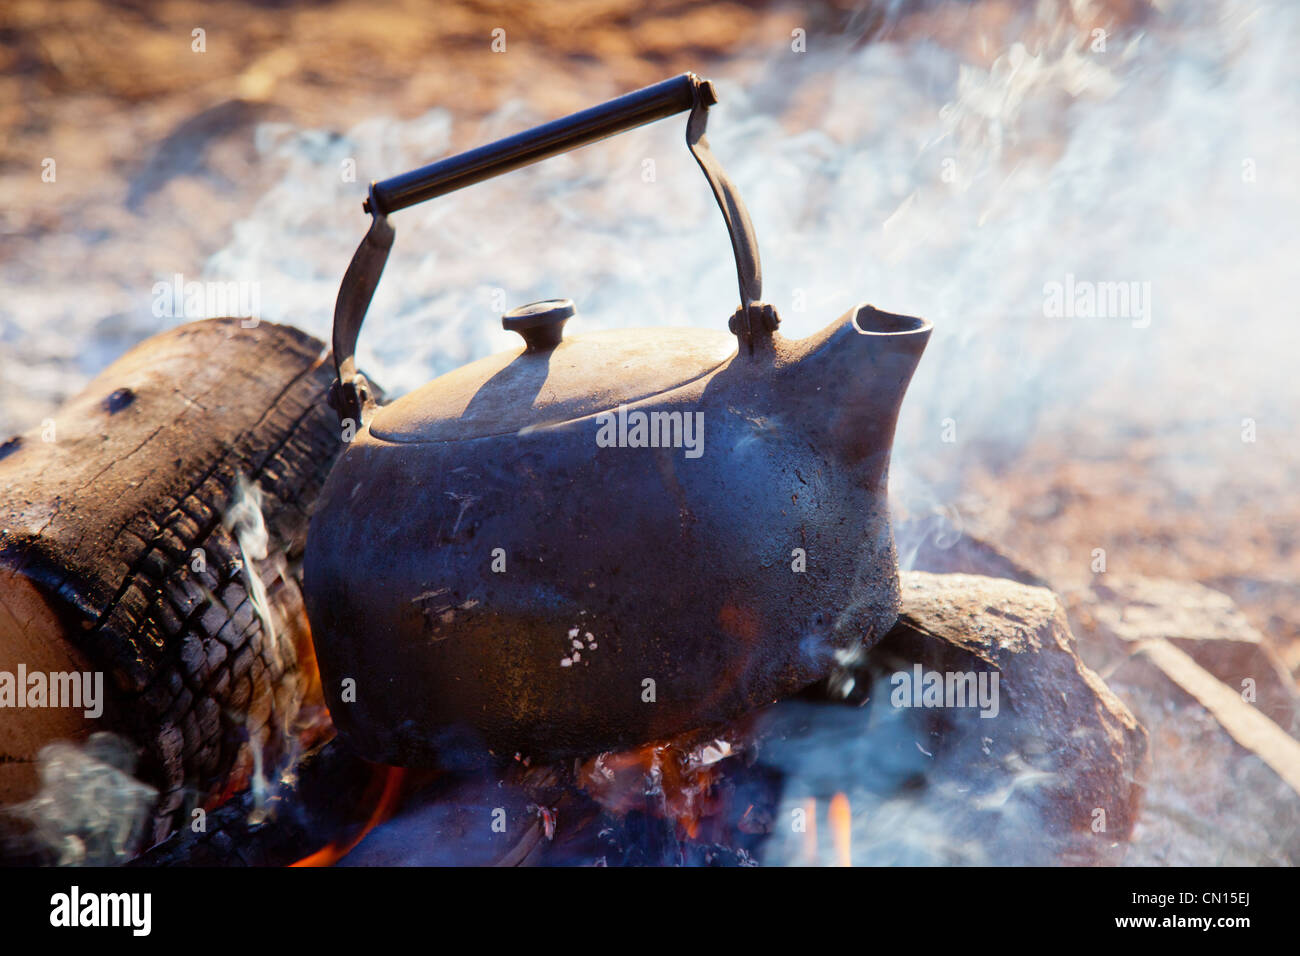 Kettle on an open fire. Gawler Ranges South Australia Stock Photo